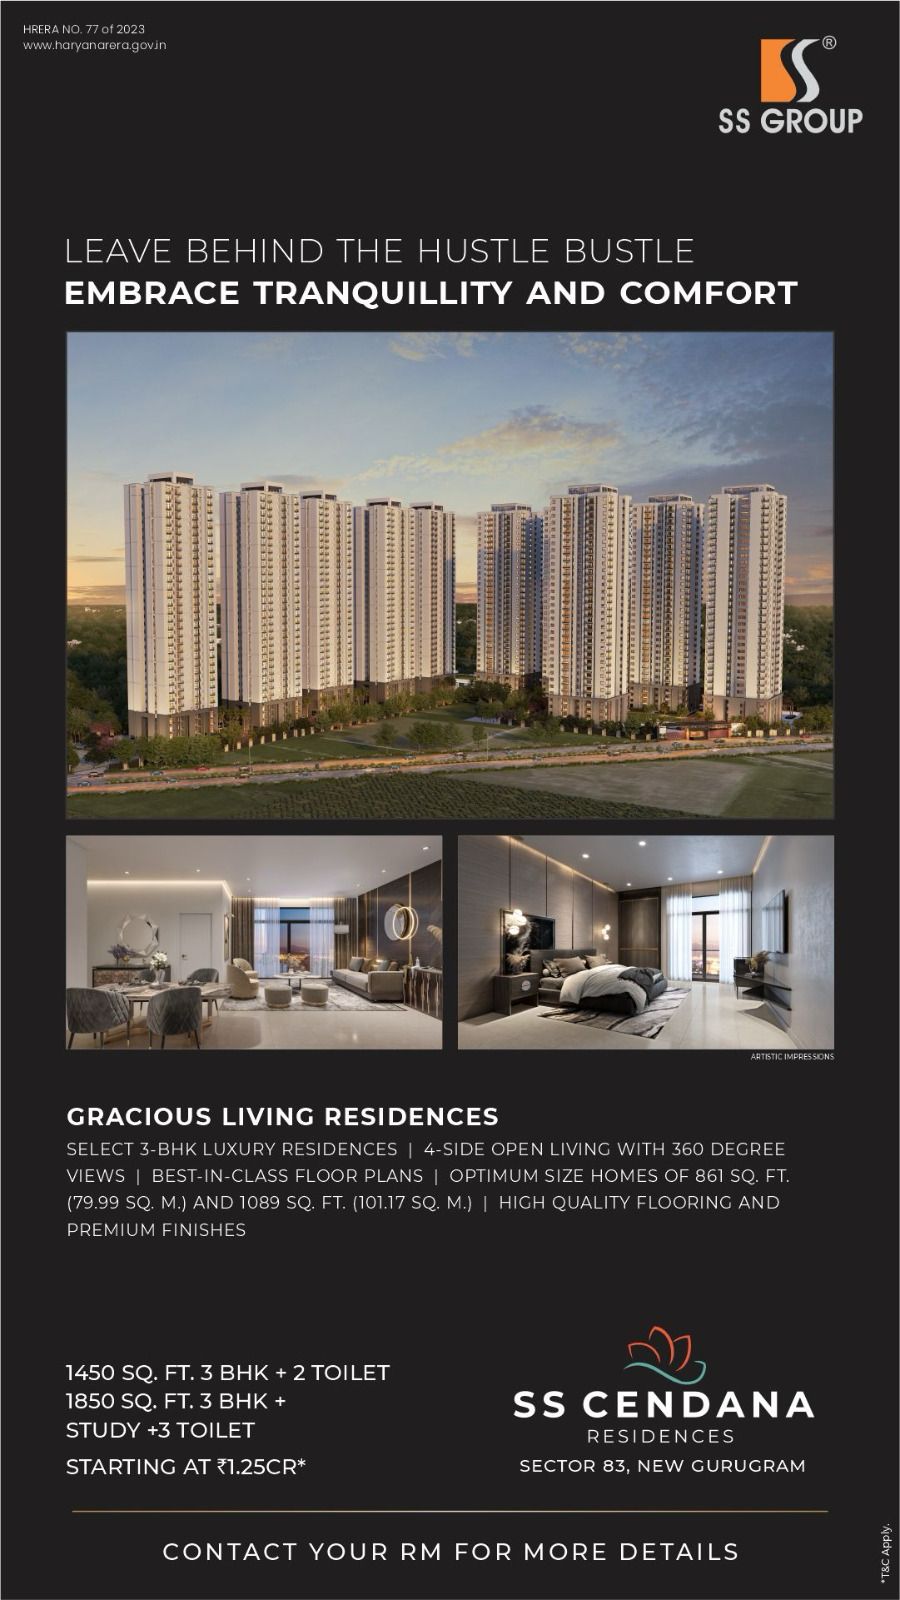 Leave behind the hustle bustle embrace tranquillity and comfort at SS Cendana Residence in Sector 83, Gurgaon Update